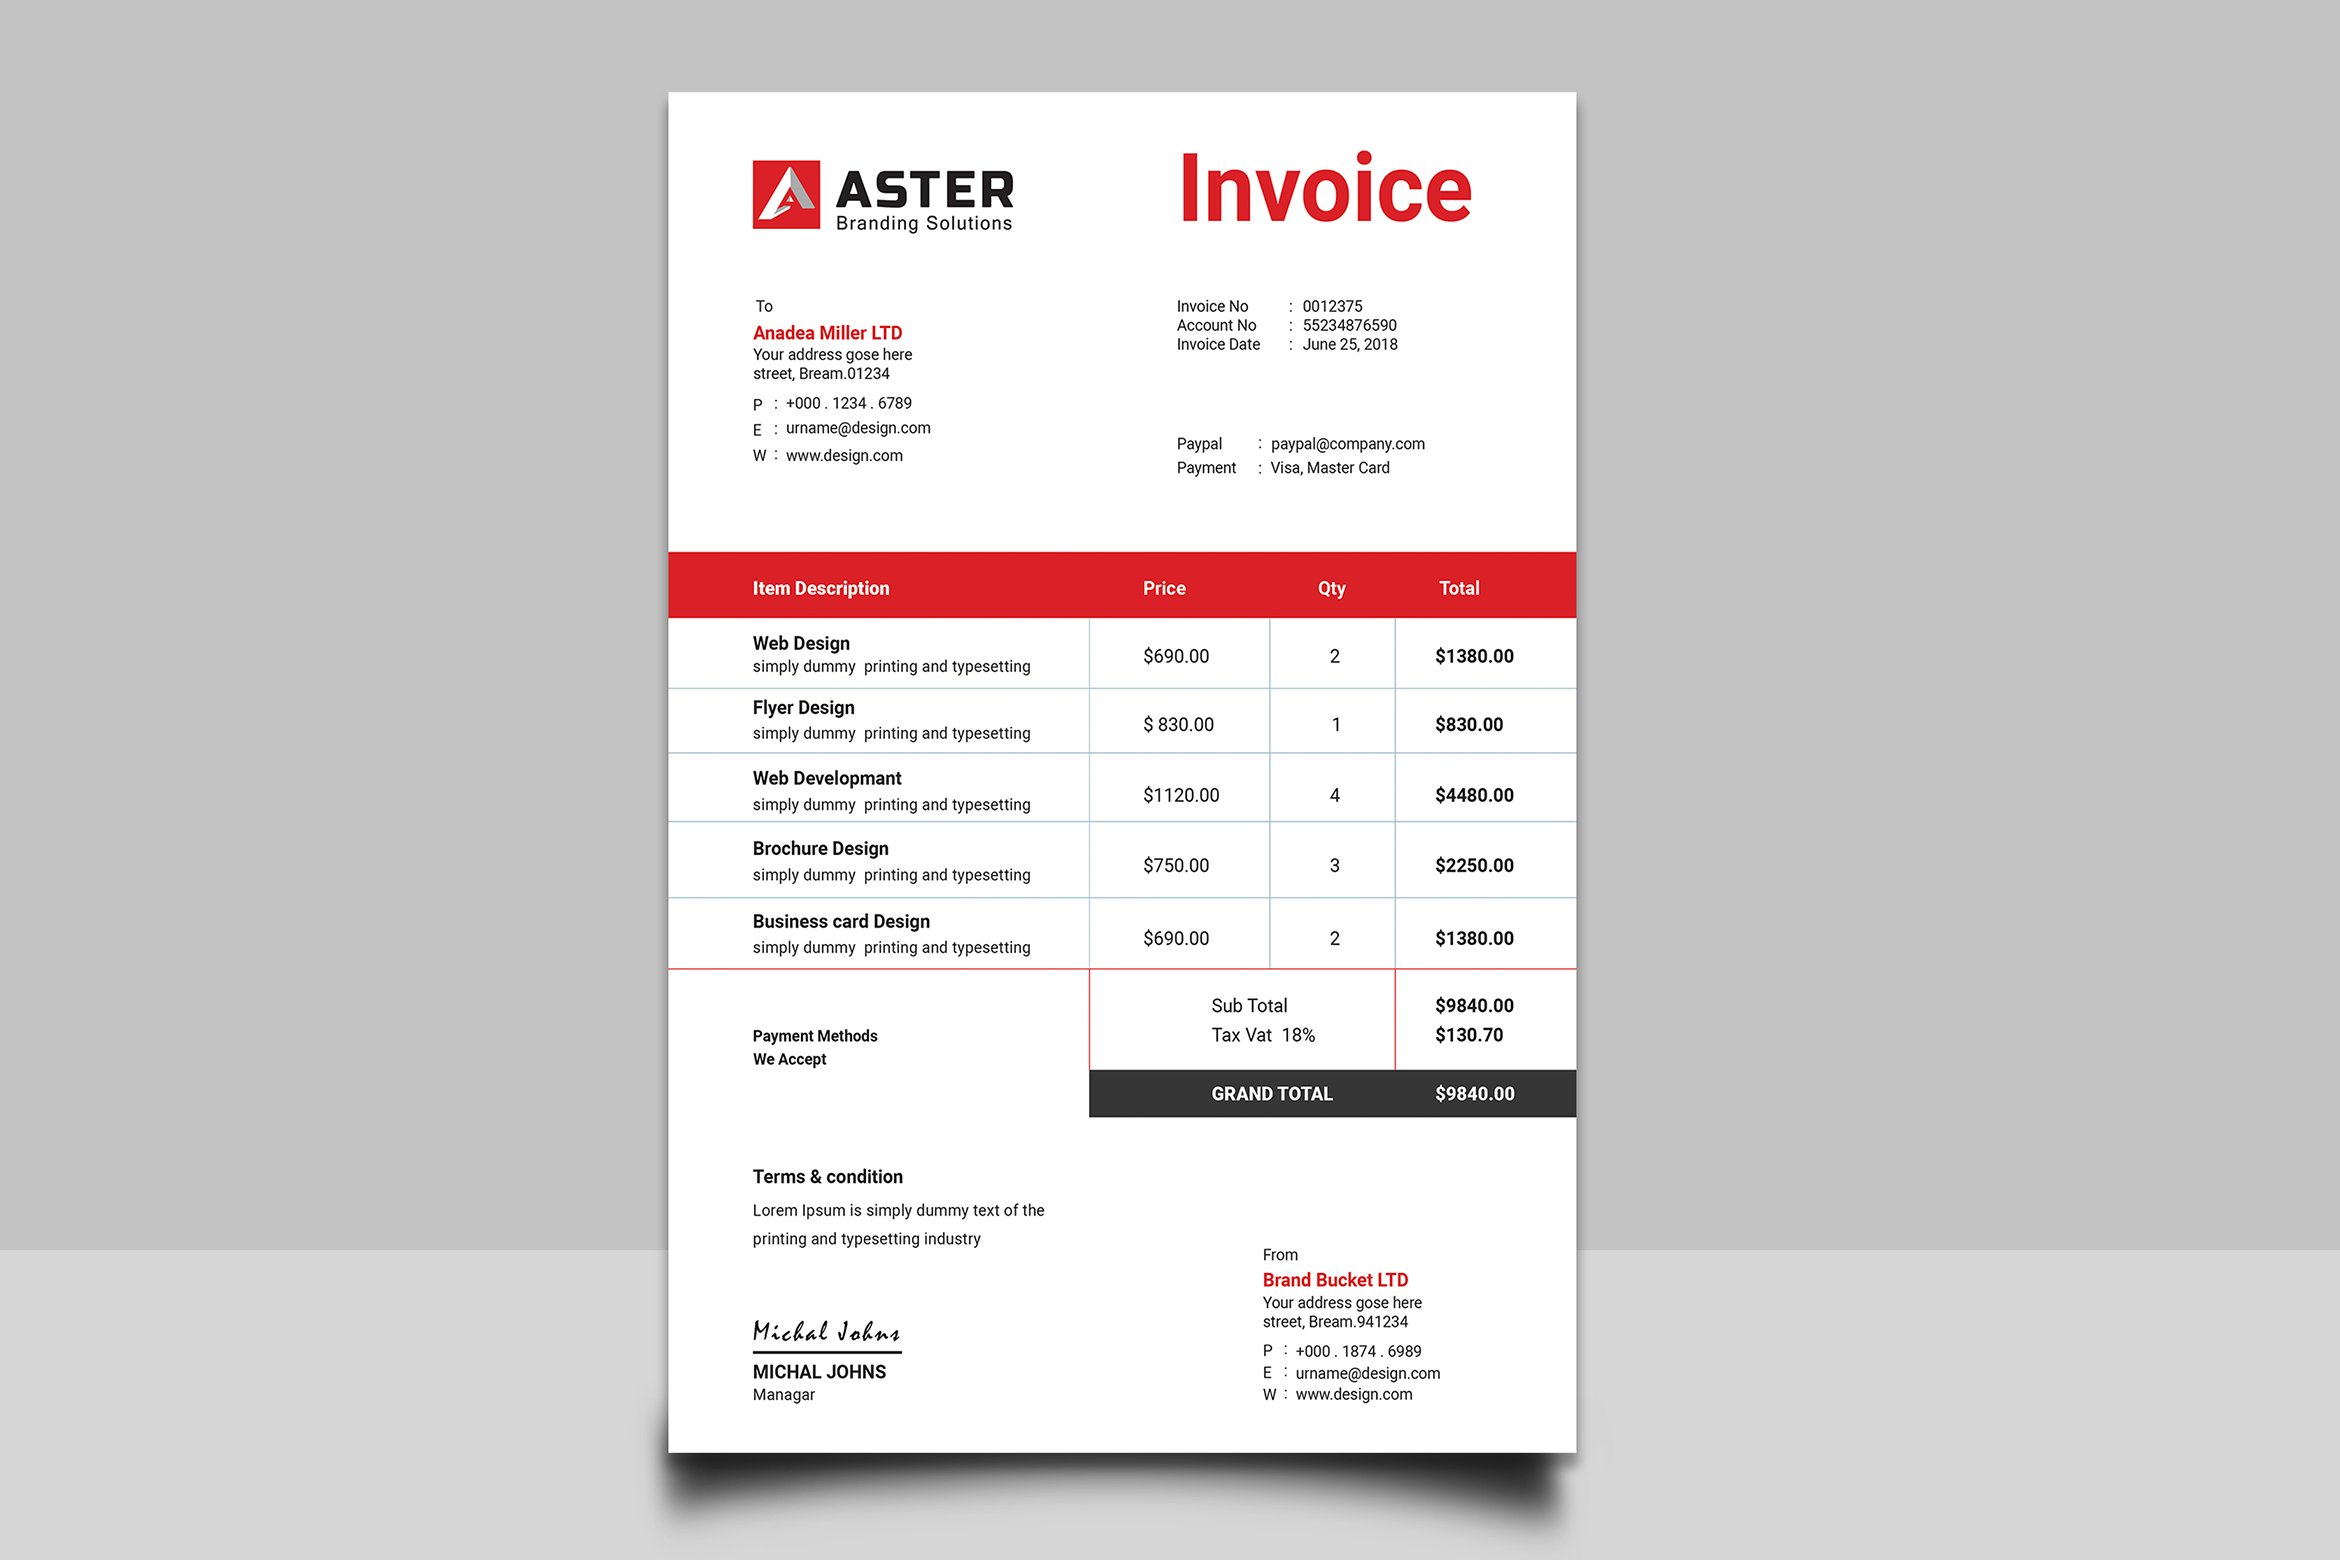 Clean Invoice preview image.